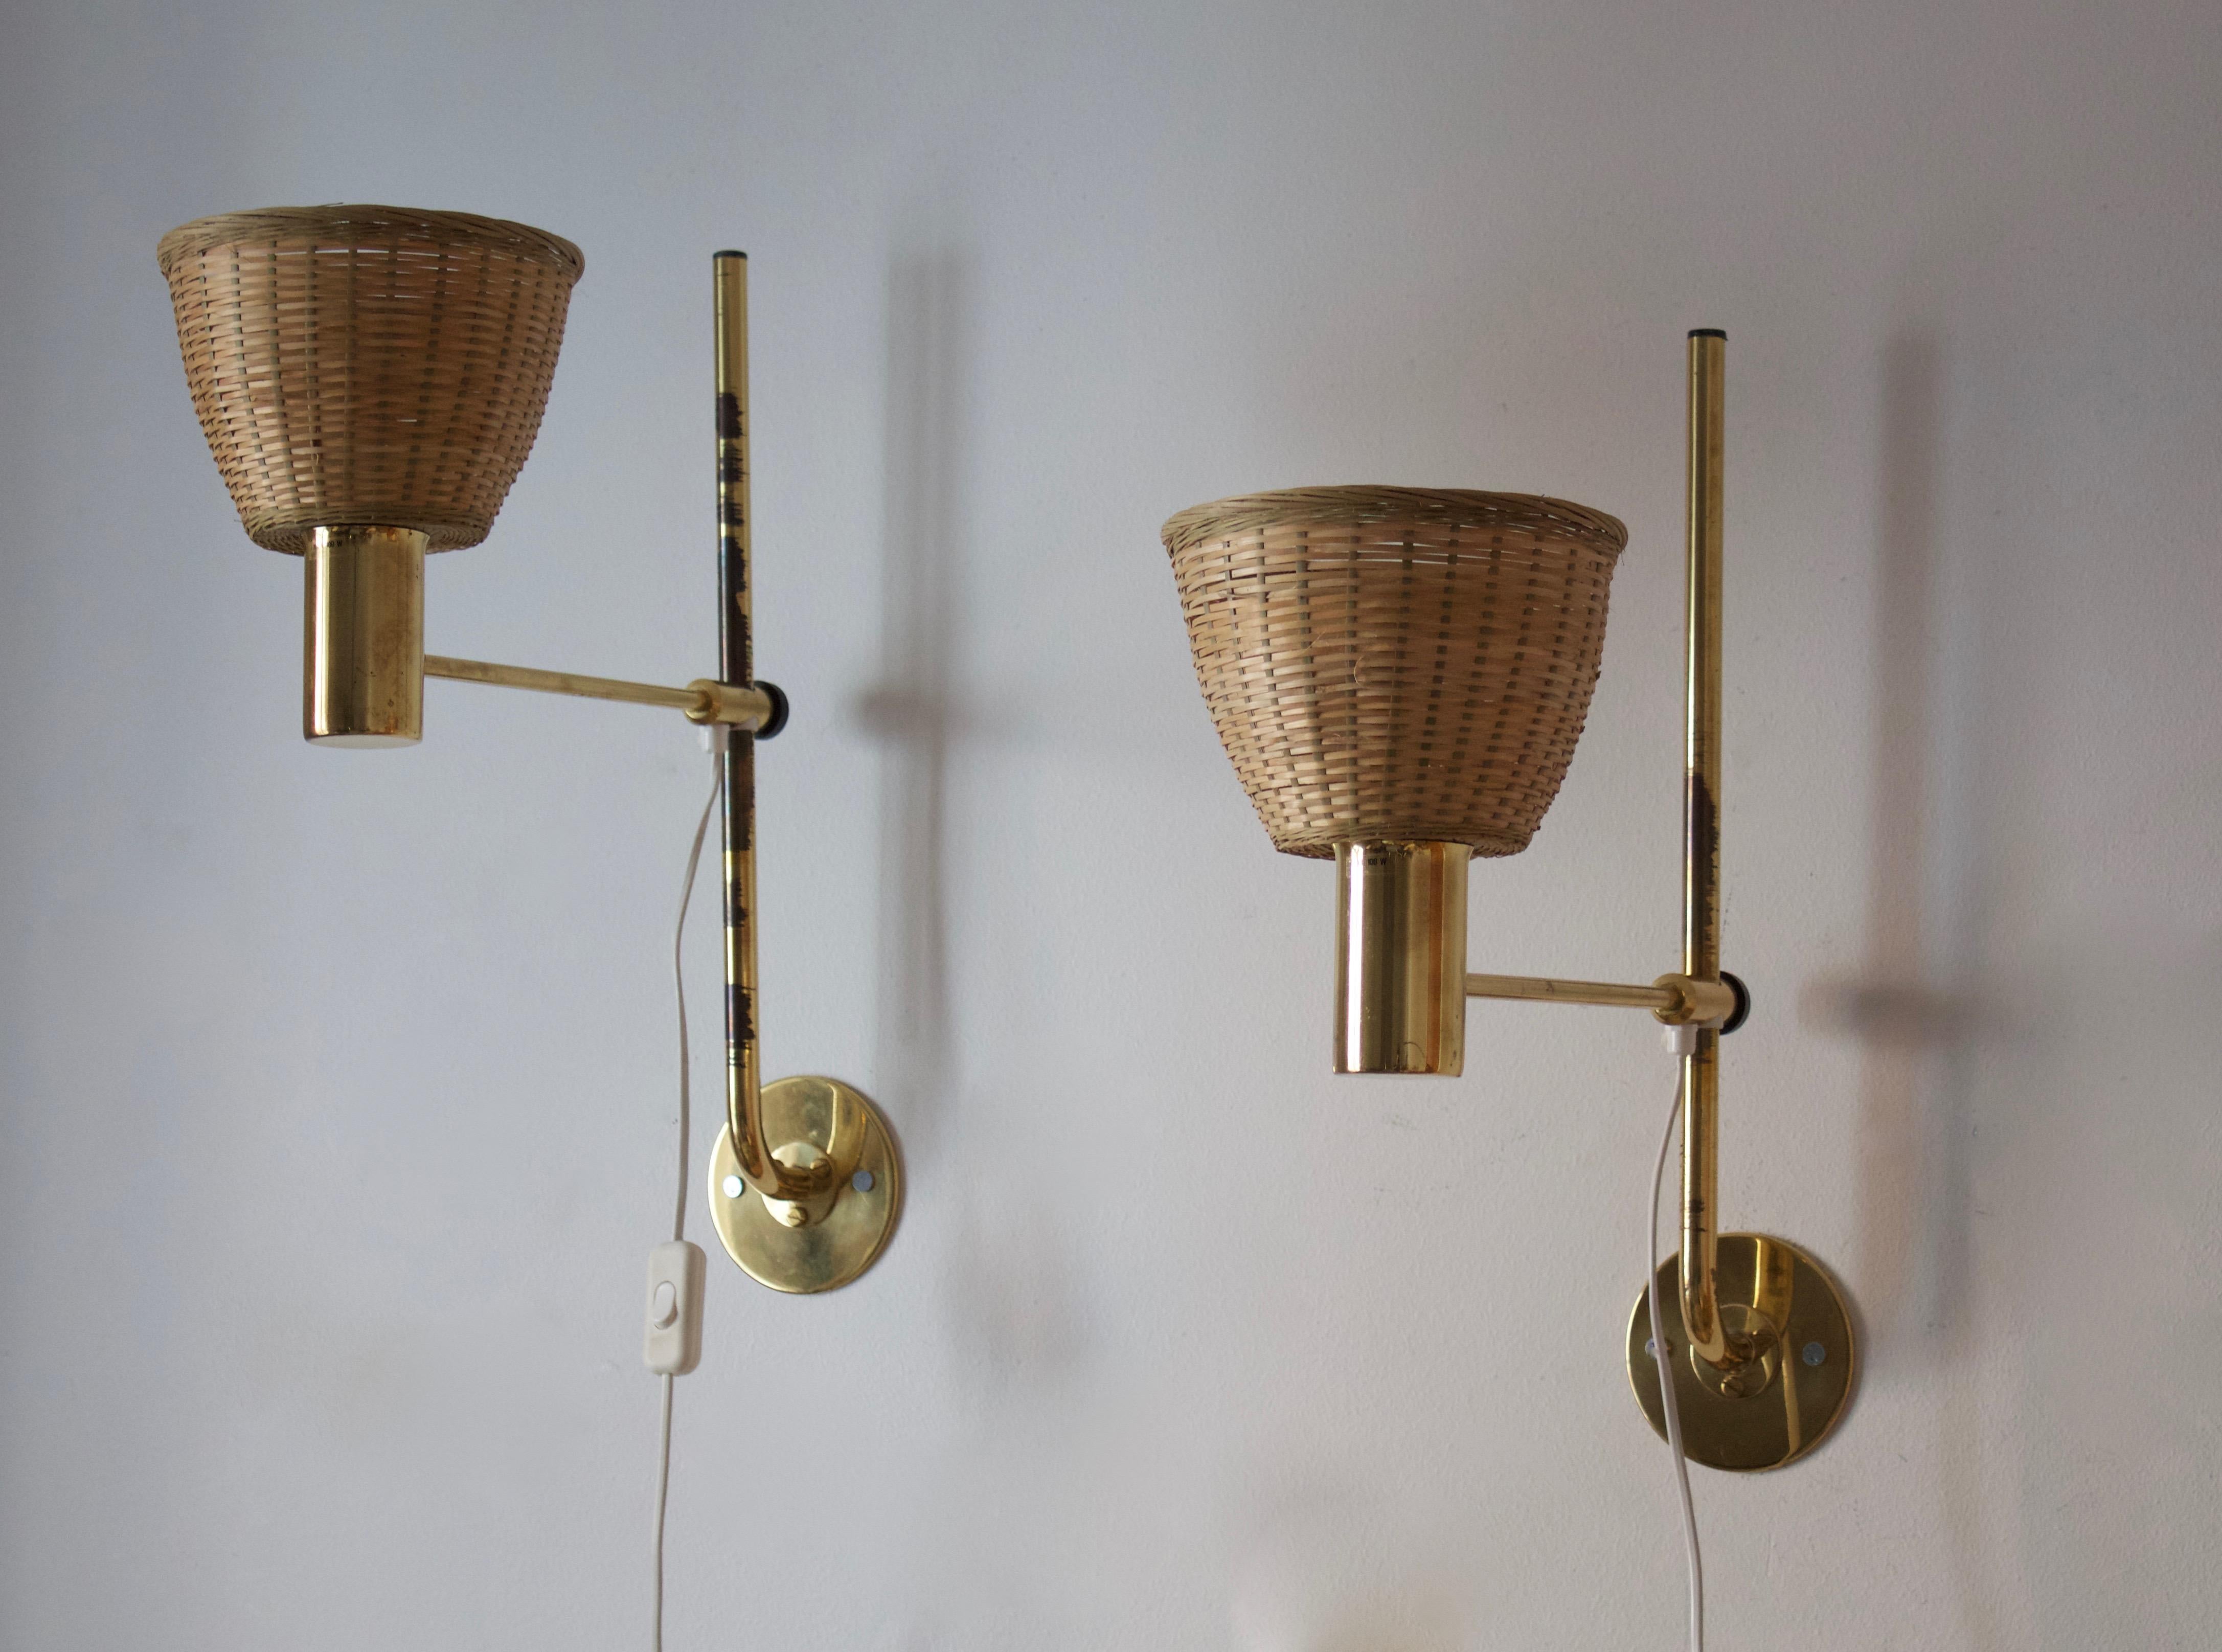 A pair of adjustable wall lights, designed by Hans-Agne Jakobsson for his own firm in Markaryd, Sweden. c. 1960s-1970s.

Assorted vintage rattan lampshades.